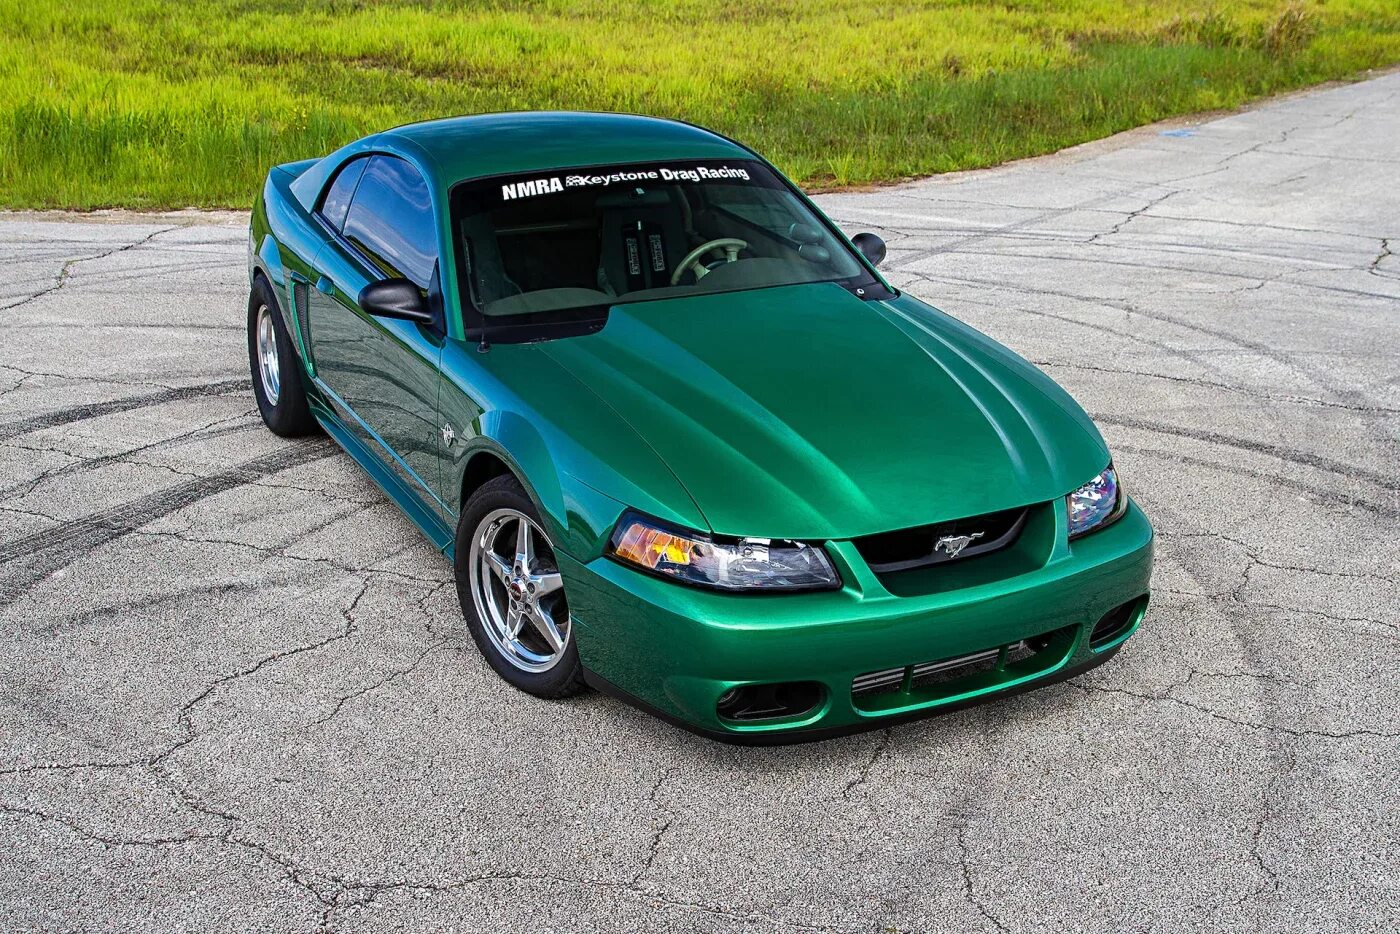 Форд Мустанг 1999. Ford Mustang 1999. Ford Mustang gt 1999. Ford Mustang 1999 gt CUPR. Green 31